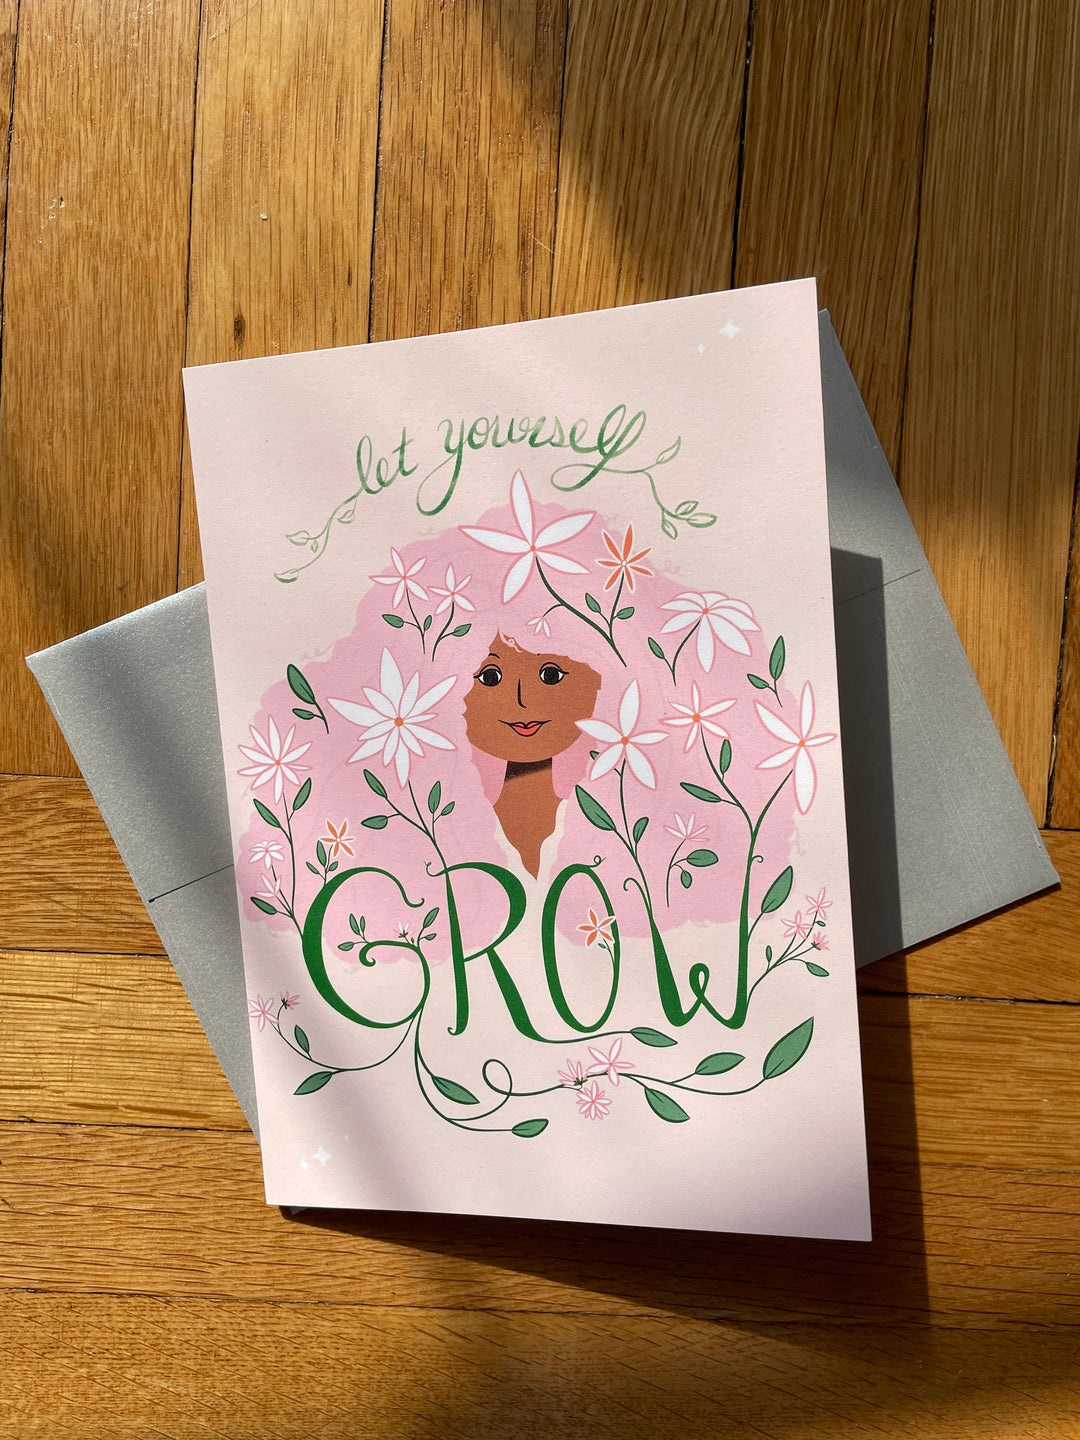 "Let Yourself Grow" Hand-Lettered Card w. Woman's Face, Long Hair & Flowers - Recycled Eco Greeting Card + Envelope, Blank inside (Grow & Bloom)